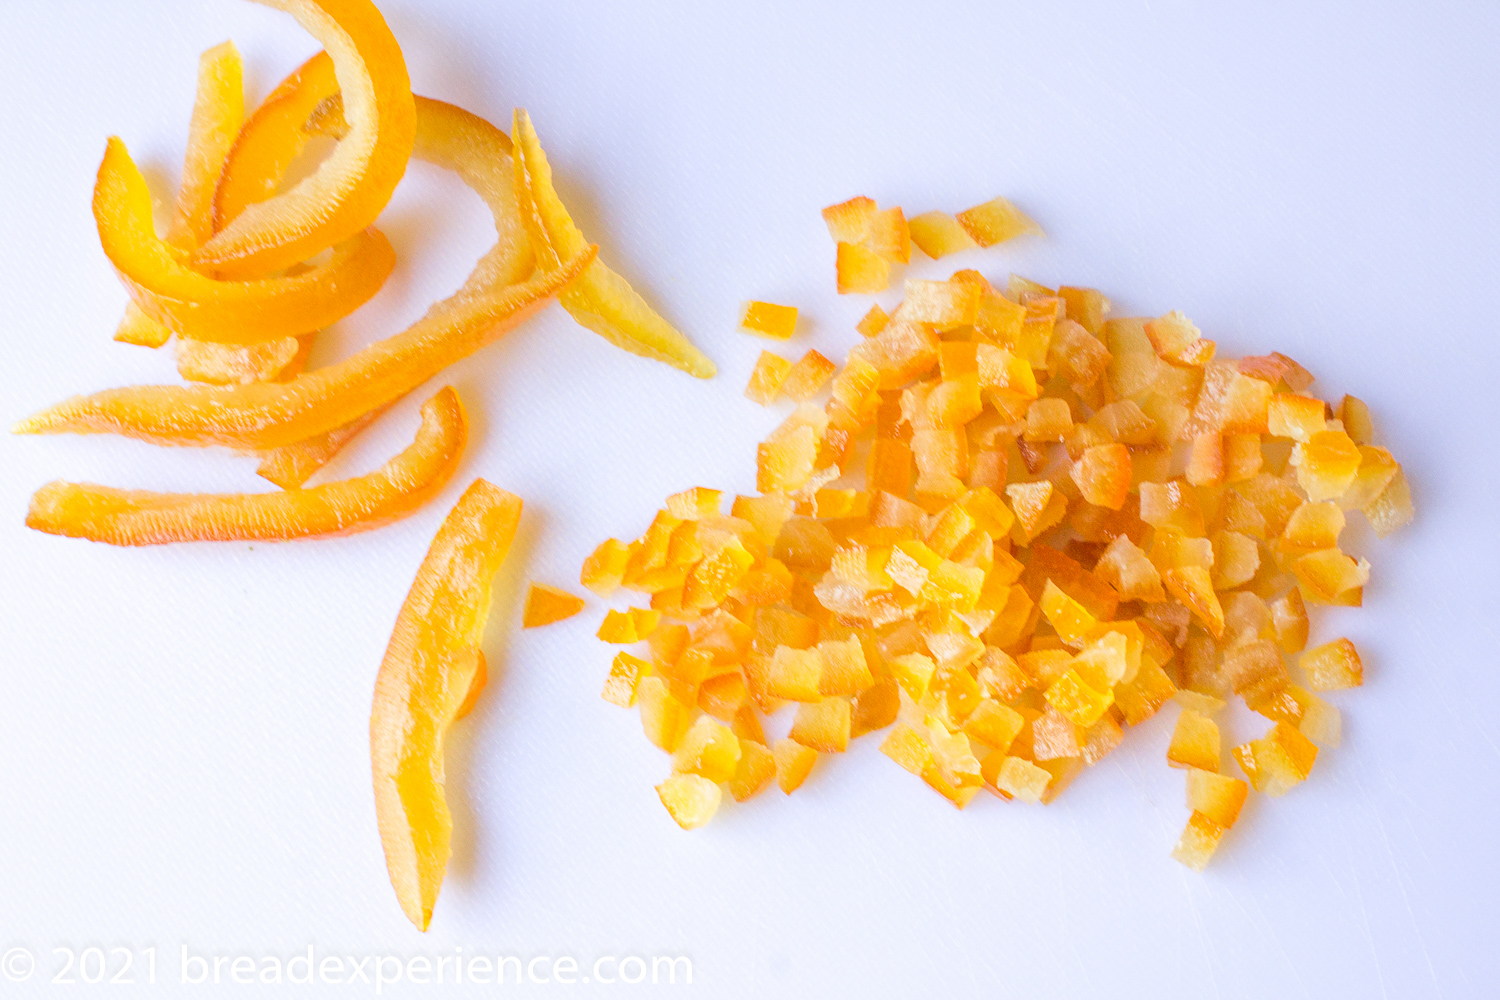 Store bought candied orange peel